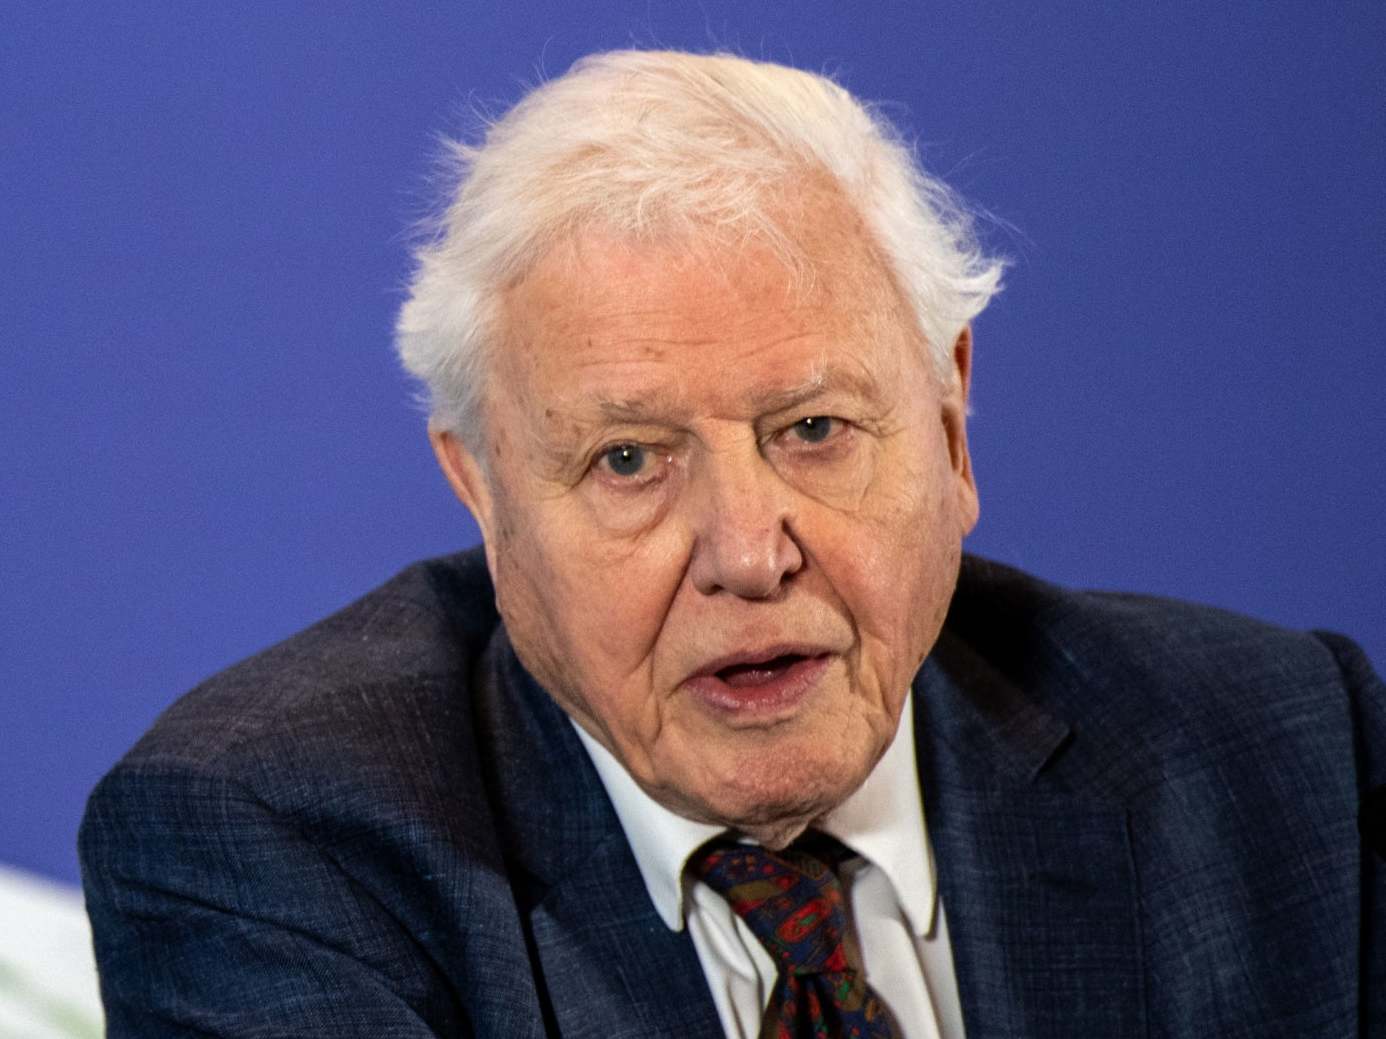 Sir David Attenborough warns climate change has been 'swept off front pages' by coronavirus